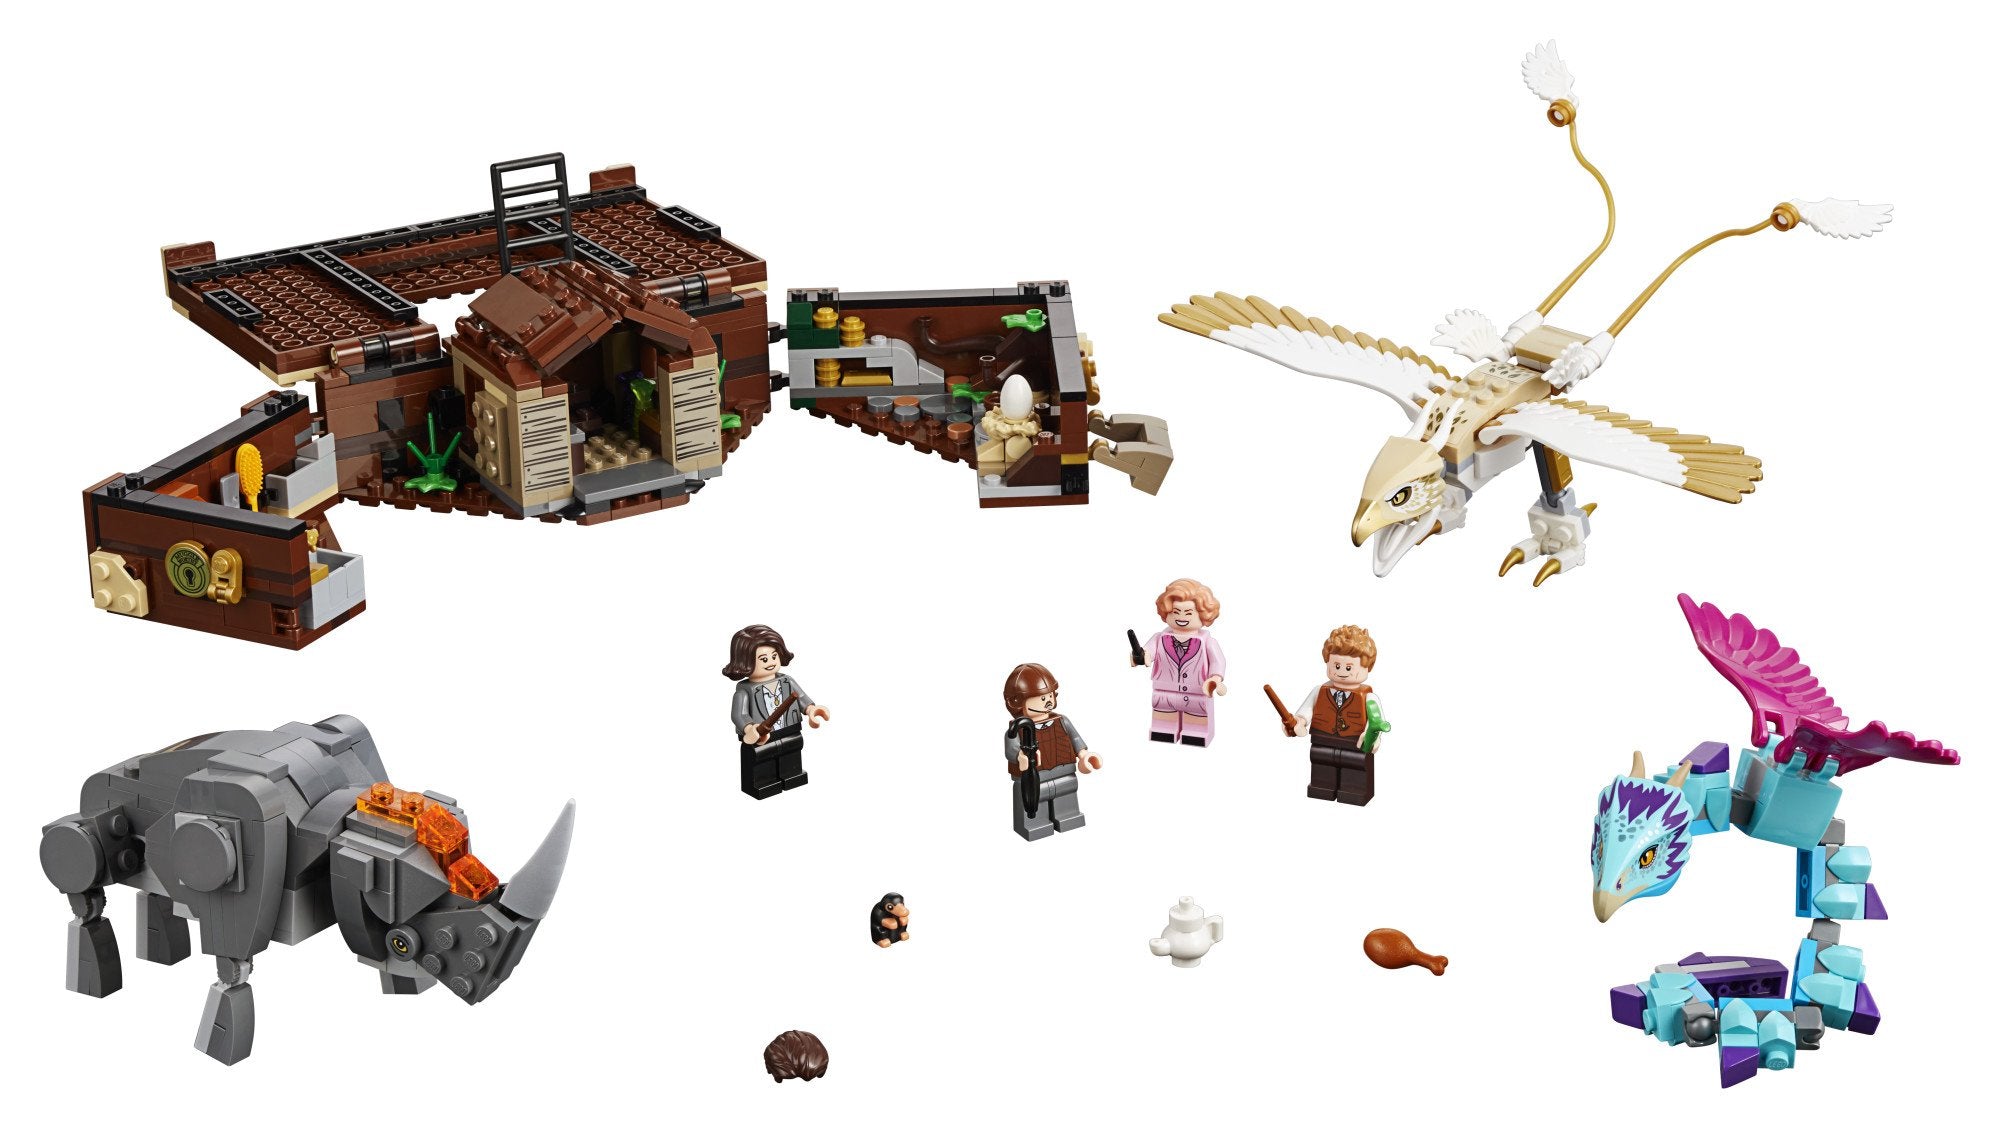 LEGO Harry Potter Newts Case of Magical Creatures Building Kit 75952 (694 Piece), Multicolor (Like New, Open Box)